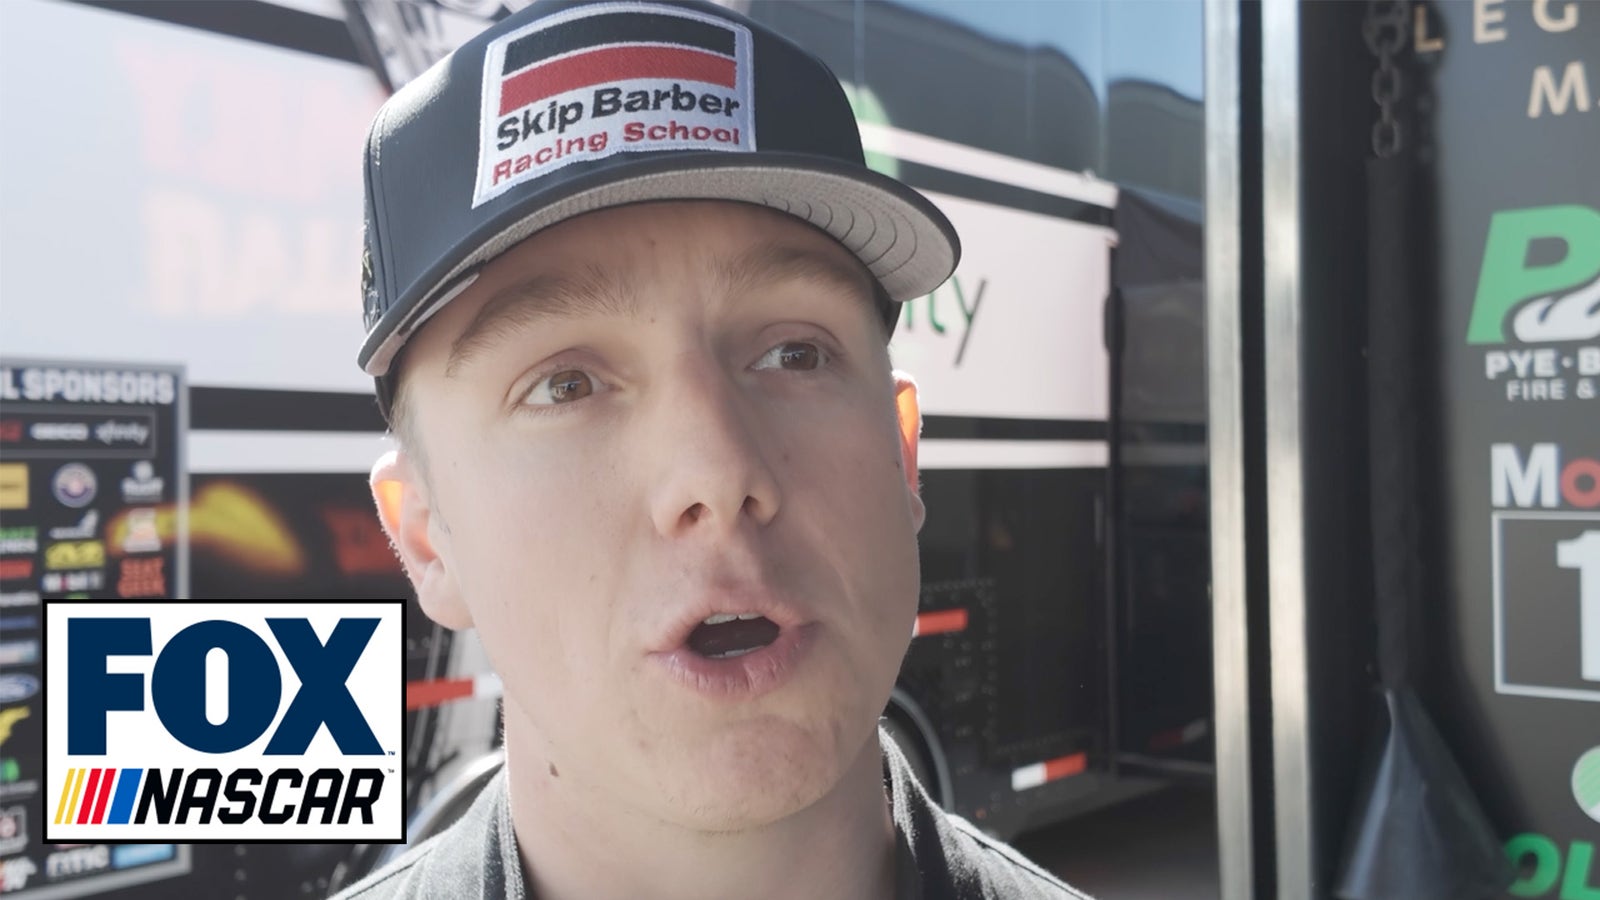 'My craft has changed quite a bit since then...' - John H. Nemechek on having his race craft questioned at times